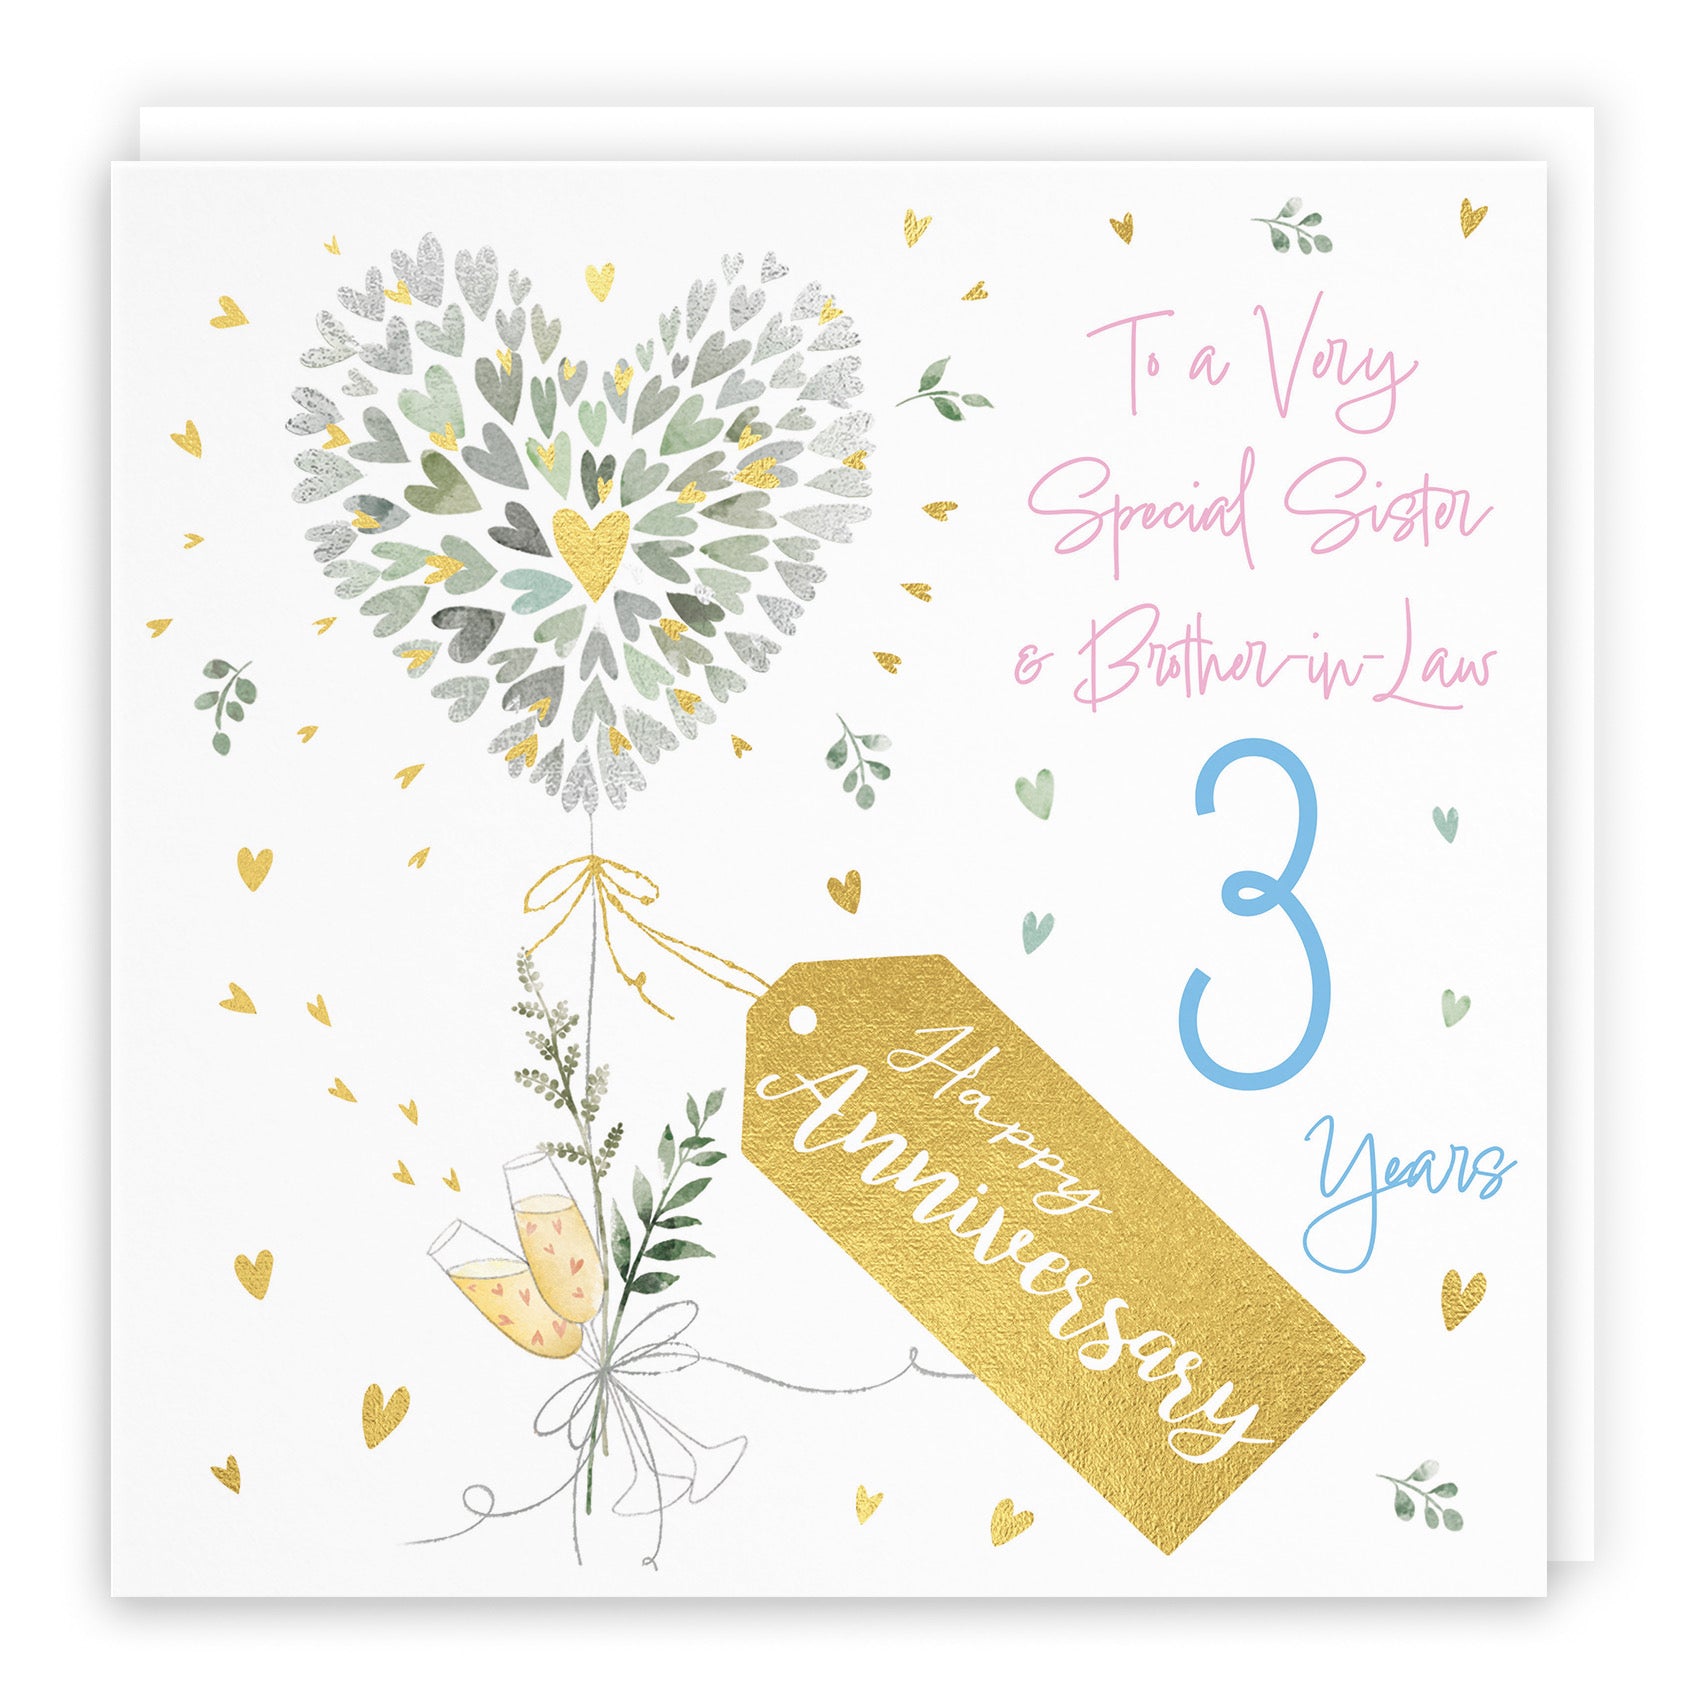 Sister And Brother-in-Law 3rd Anniversary Card Contemporary Hearts Milo's Gallery - Default Title (B0CKJ4RP14)